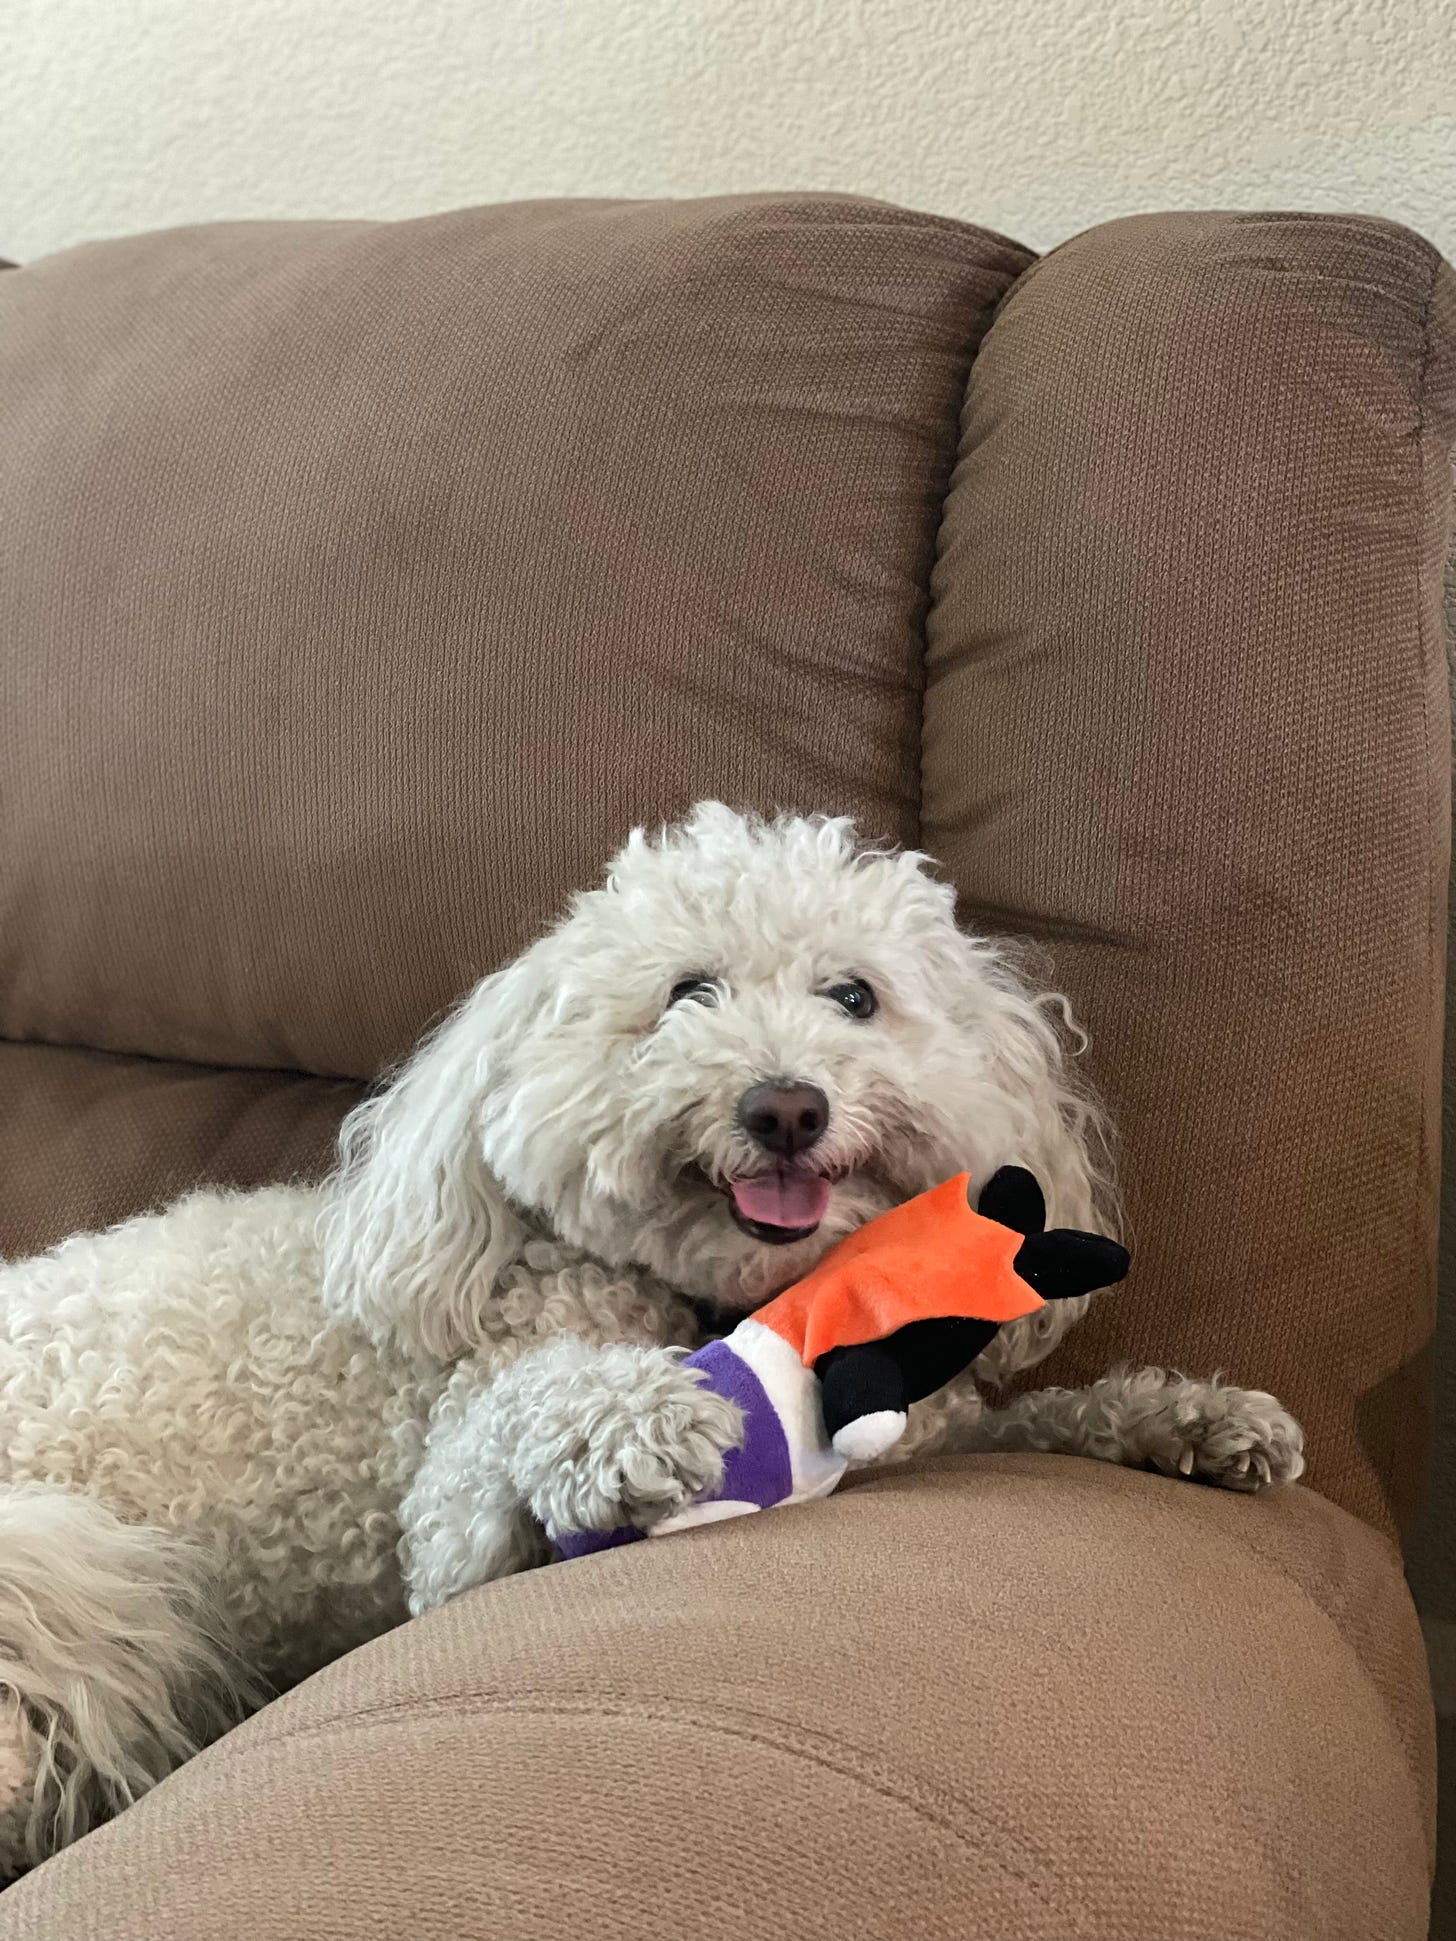 A fluffy white dog sits on a beige couch. He smiles and holds a purple and orange vampire plush toy under his paw.